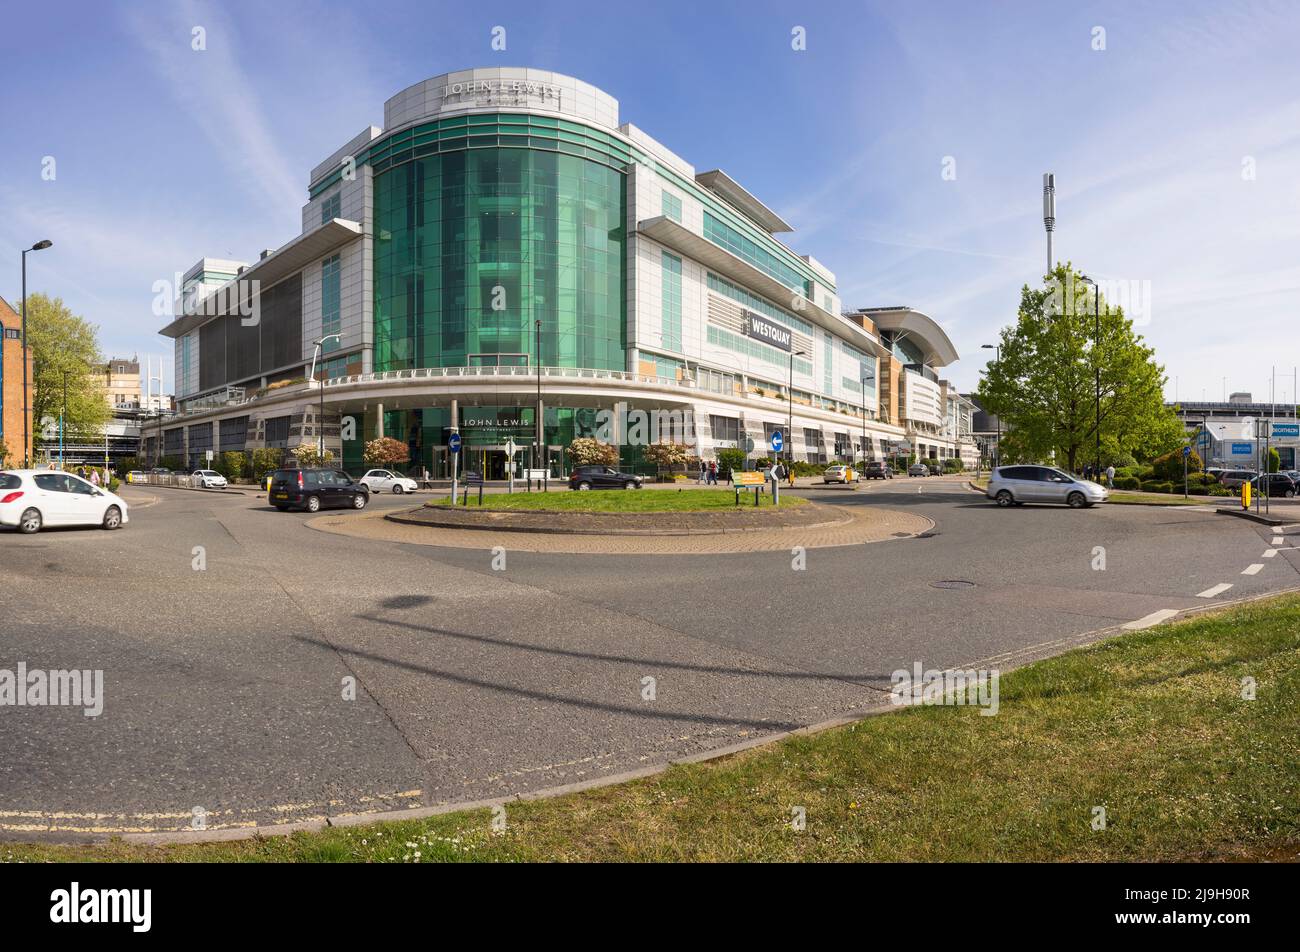 The West Quay shopping centre in Southampton, England seen from Harbour Parade Stock Photo